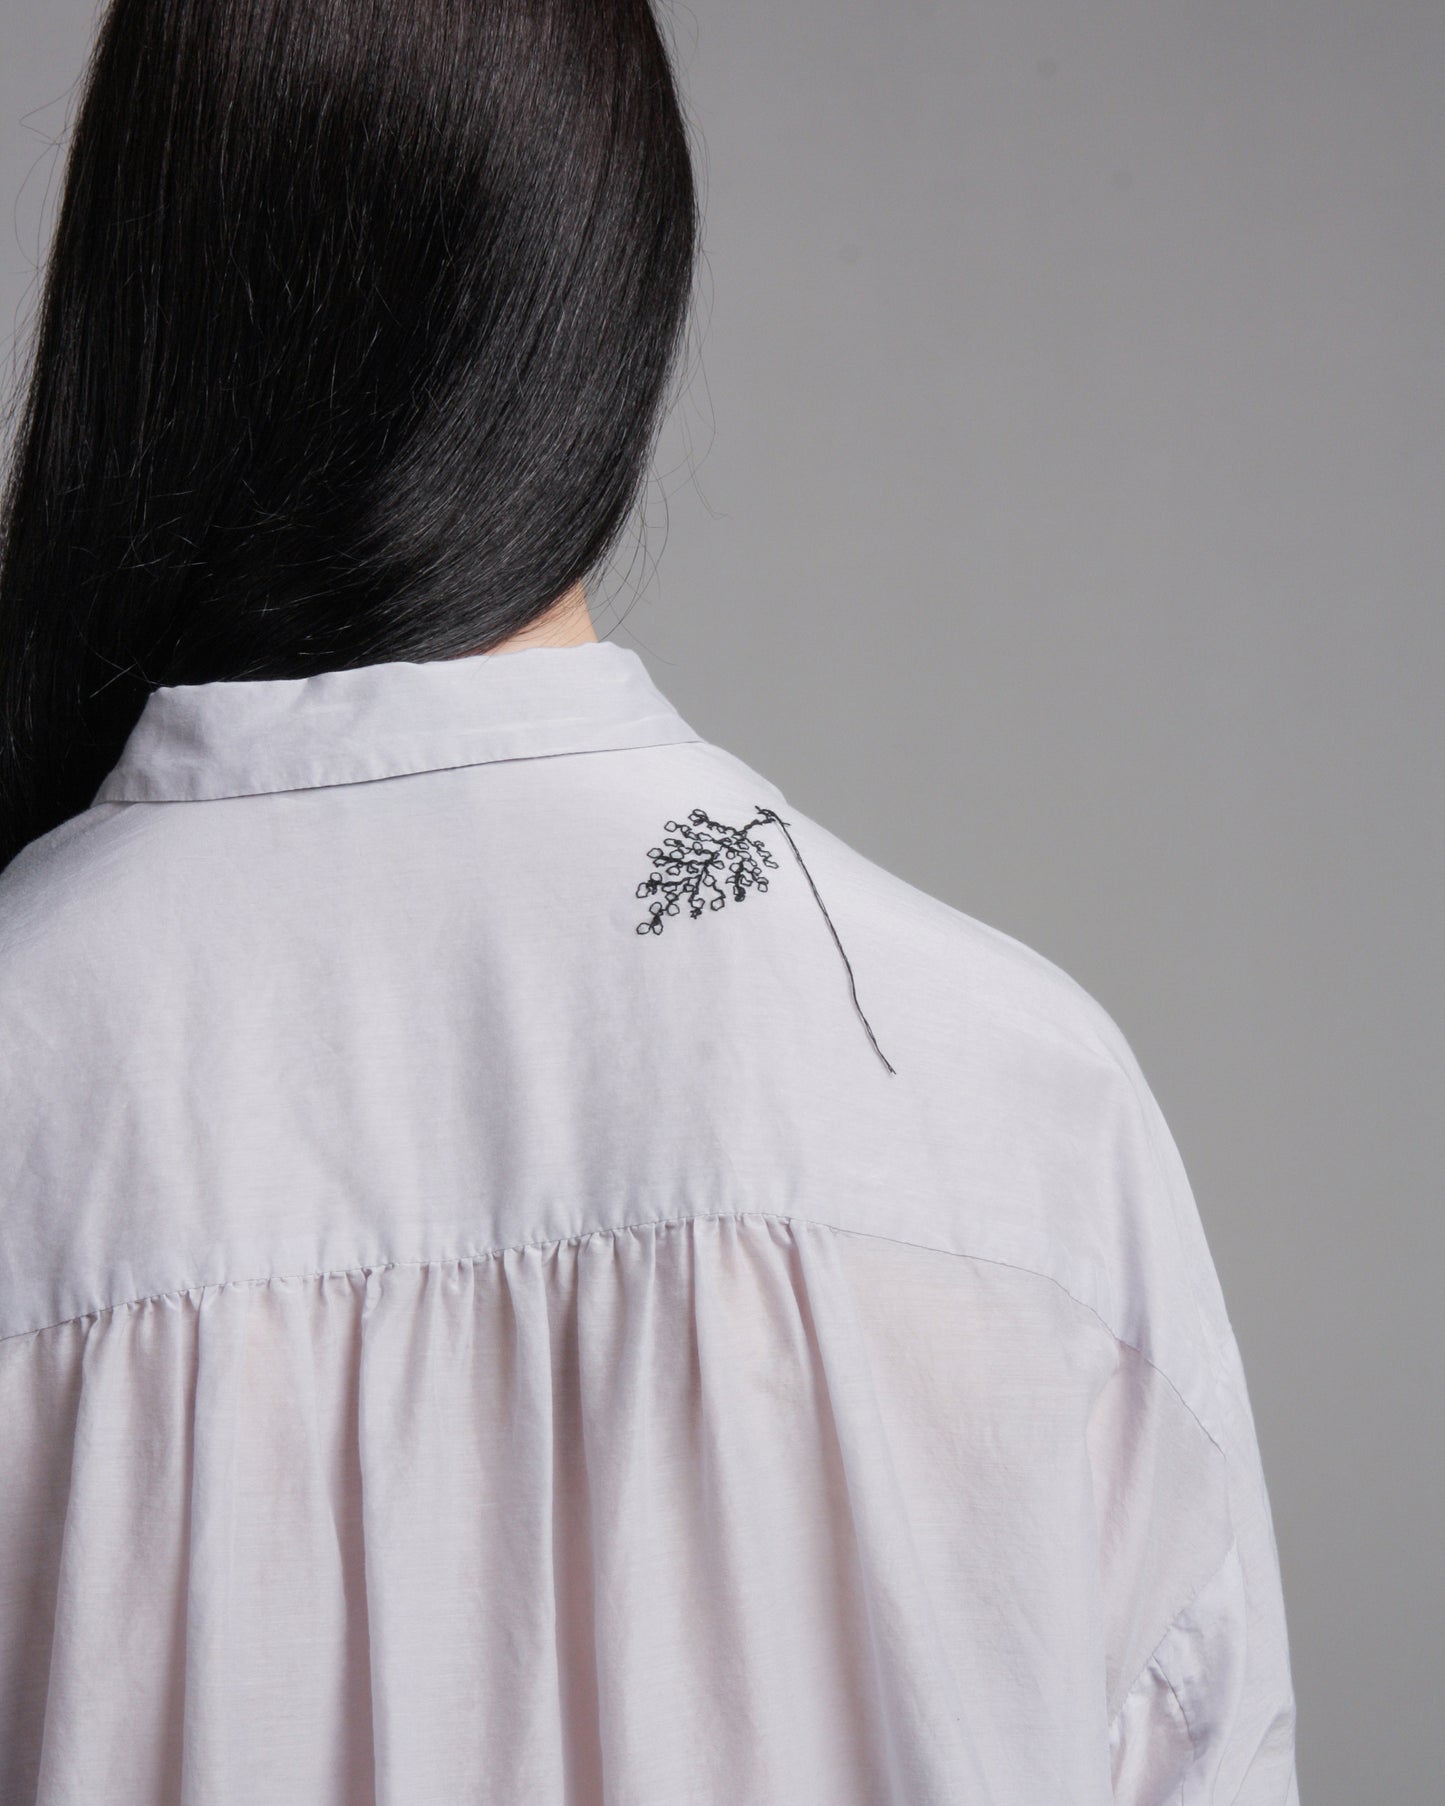 Blue Wildflower Embroidery Blouse